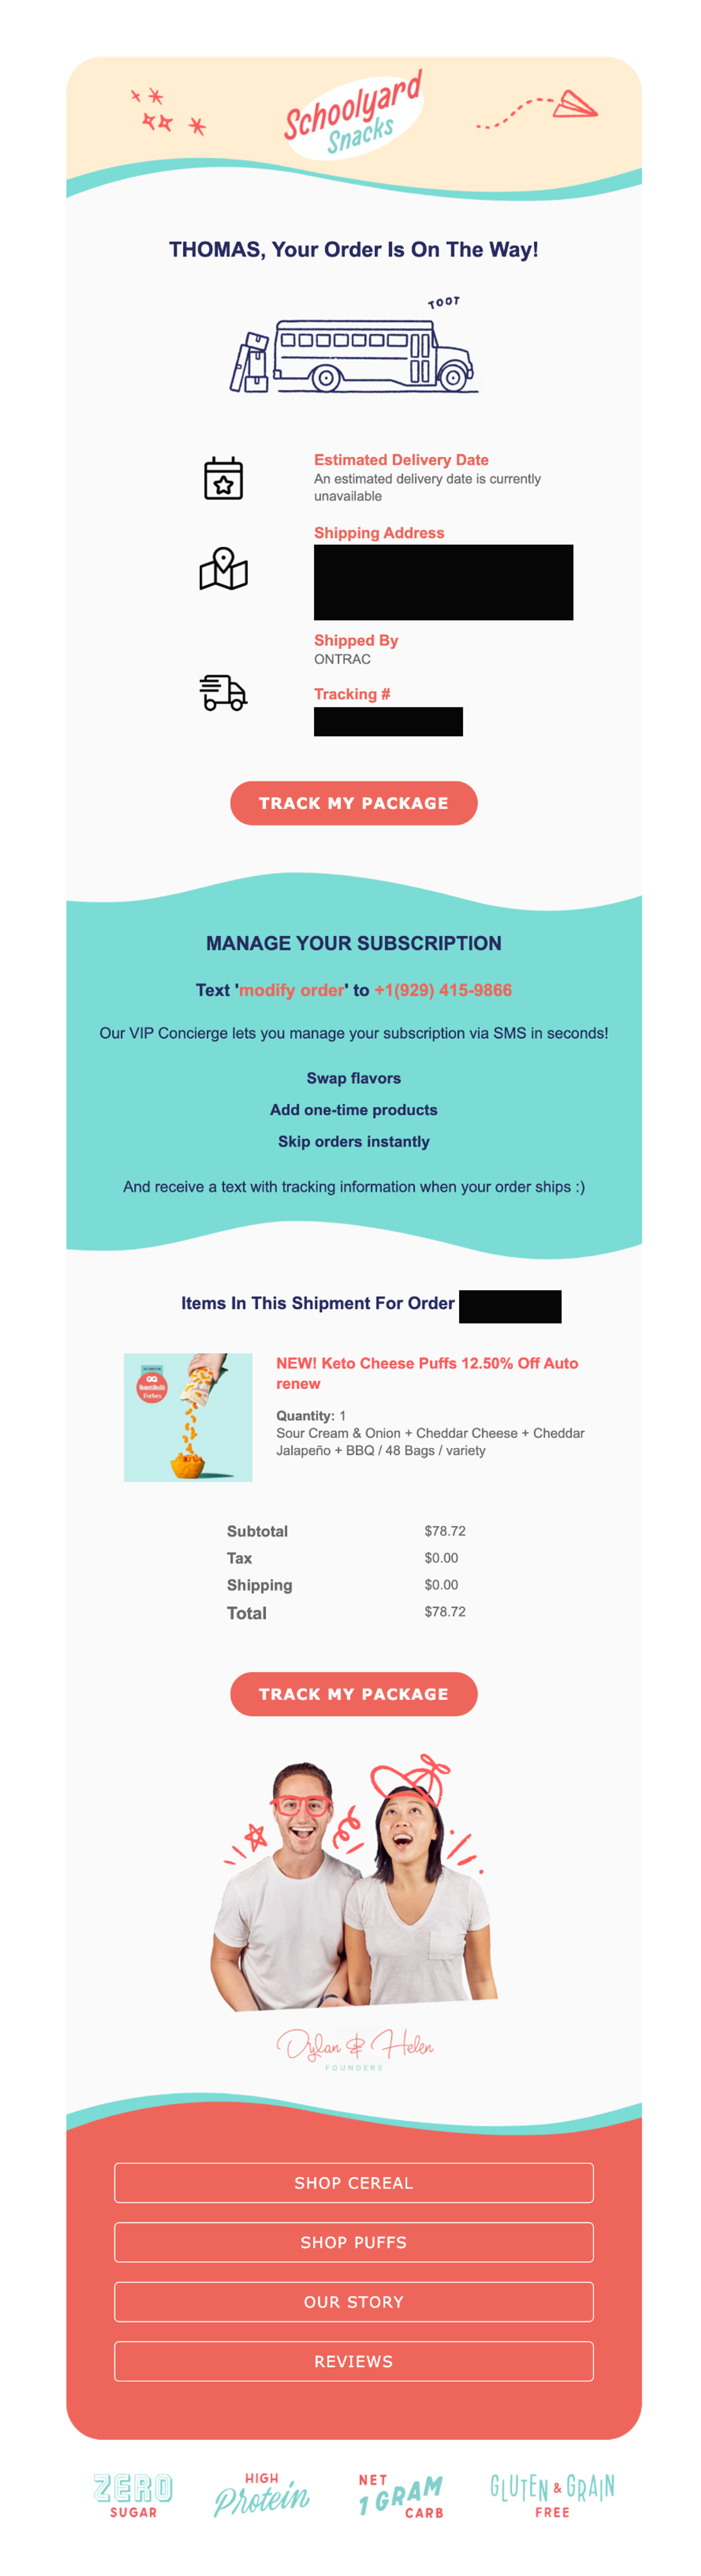 Schoolyard Snacks Order Confirmation Email Template